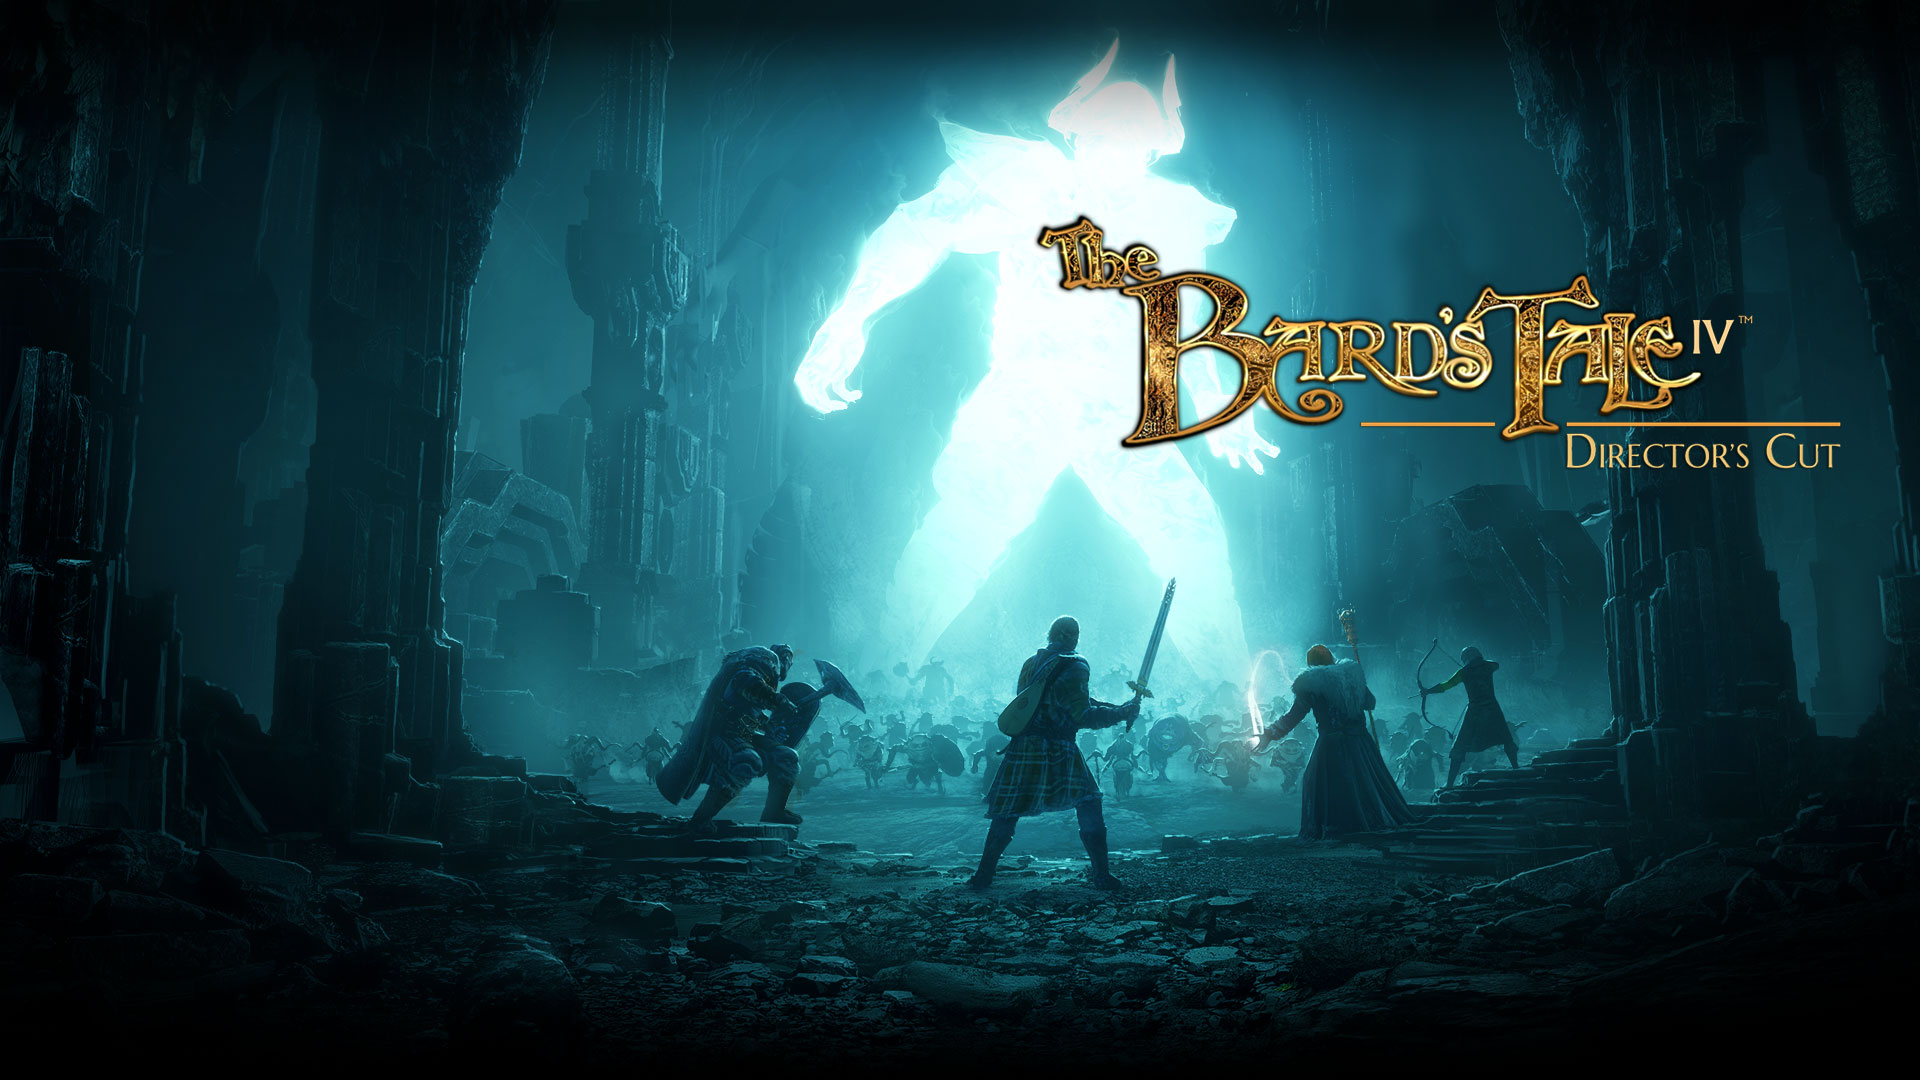 the bards tale 4 trailer